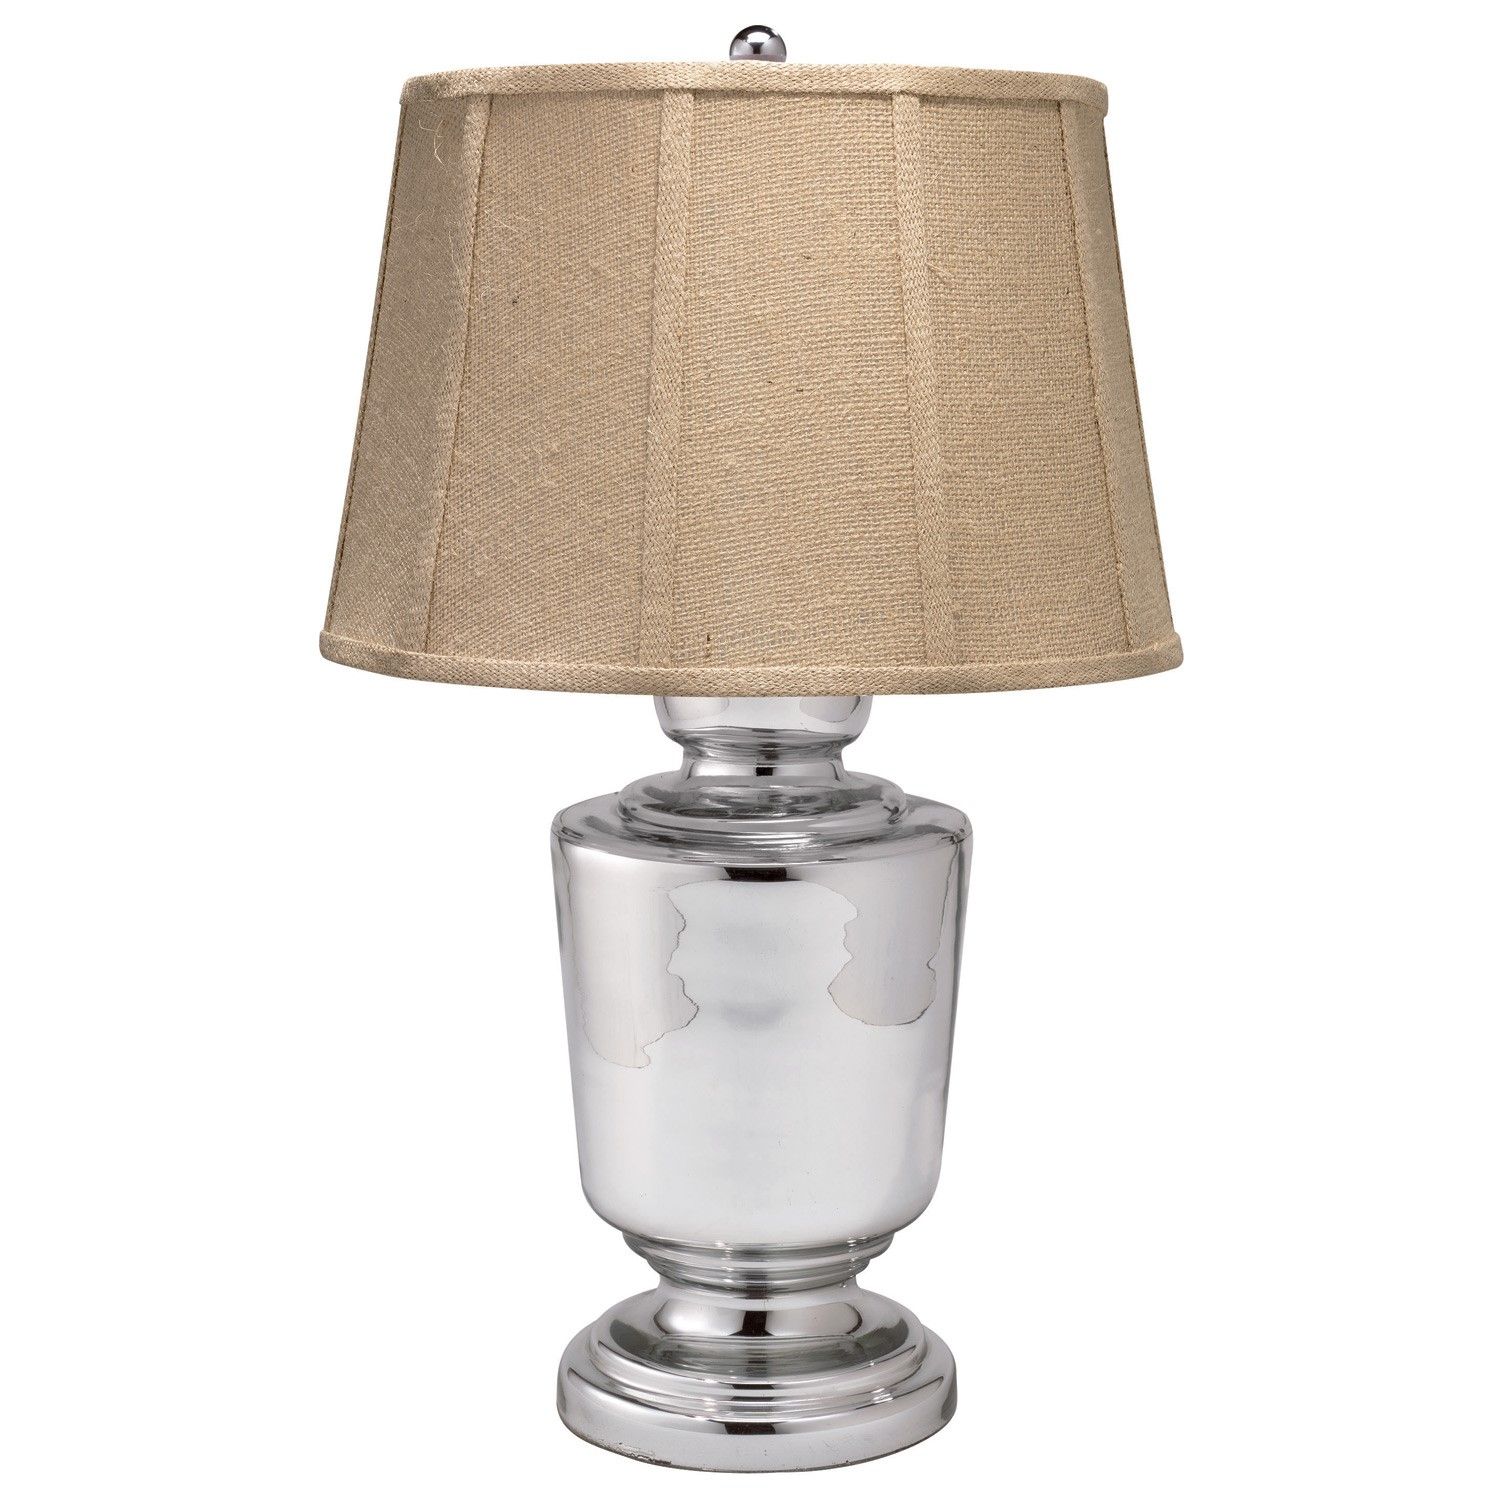 jamie young lighting table lamp base lafitte mercury glass pottery barn accent washing machines trade furniture bronze lamps for bedroom pier ornaments coastal affordable living